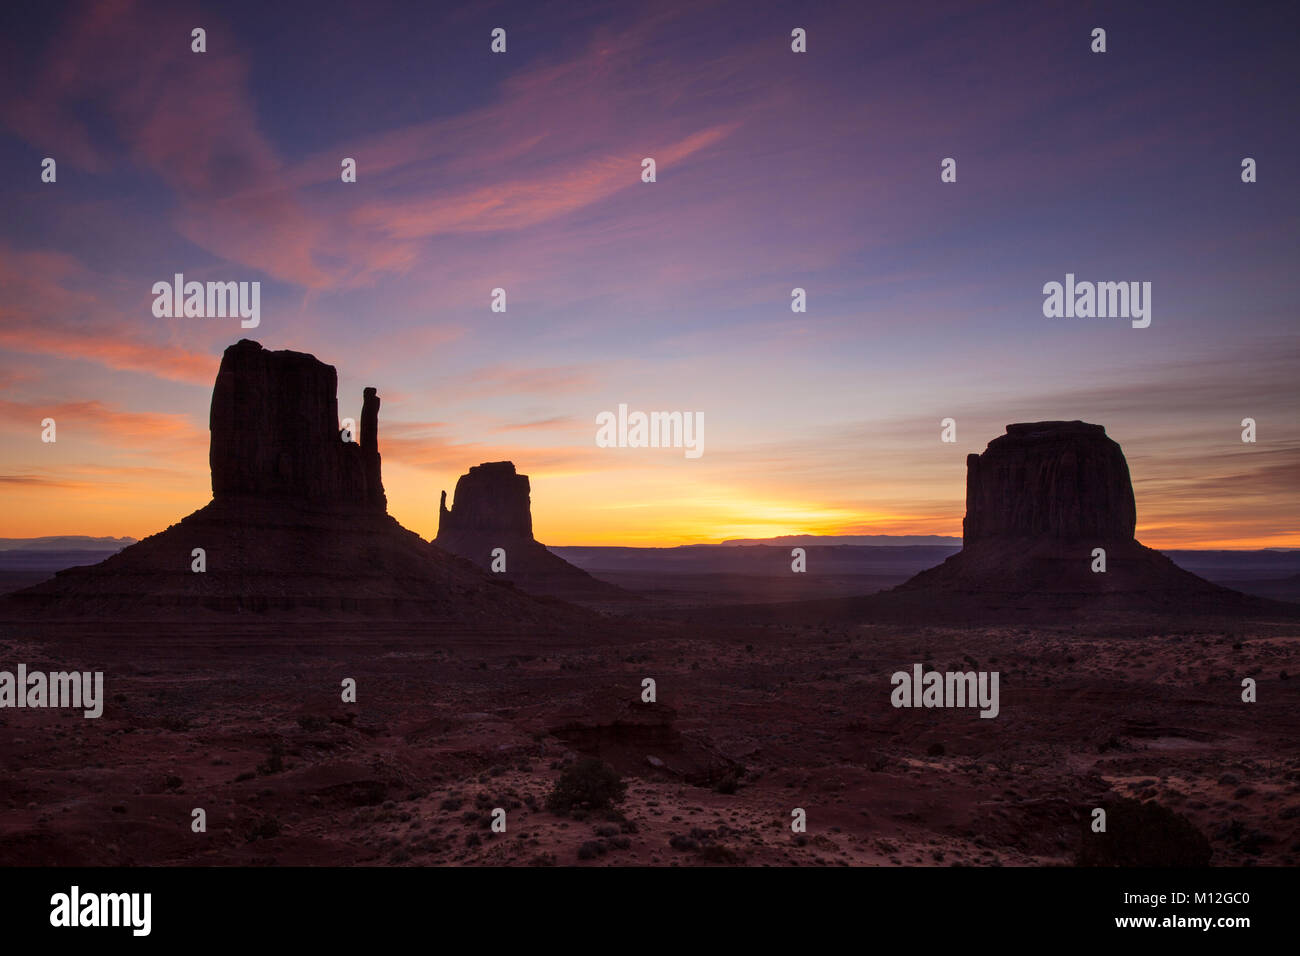 Sunrise over the Mittens rock formations in Monument Valley, Navajo Tribal Park, Arizona, USA Stock Photo